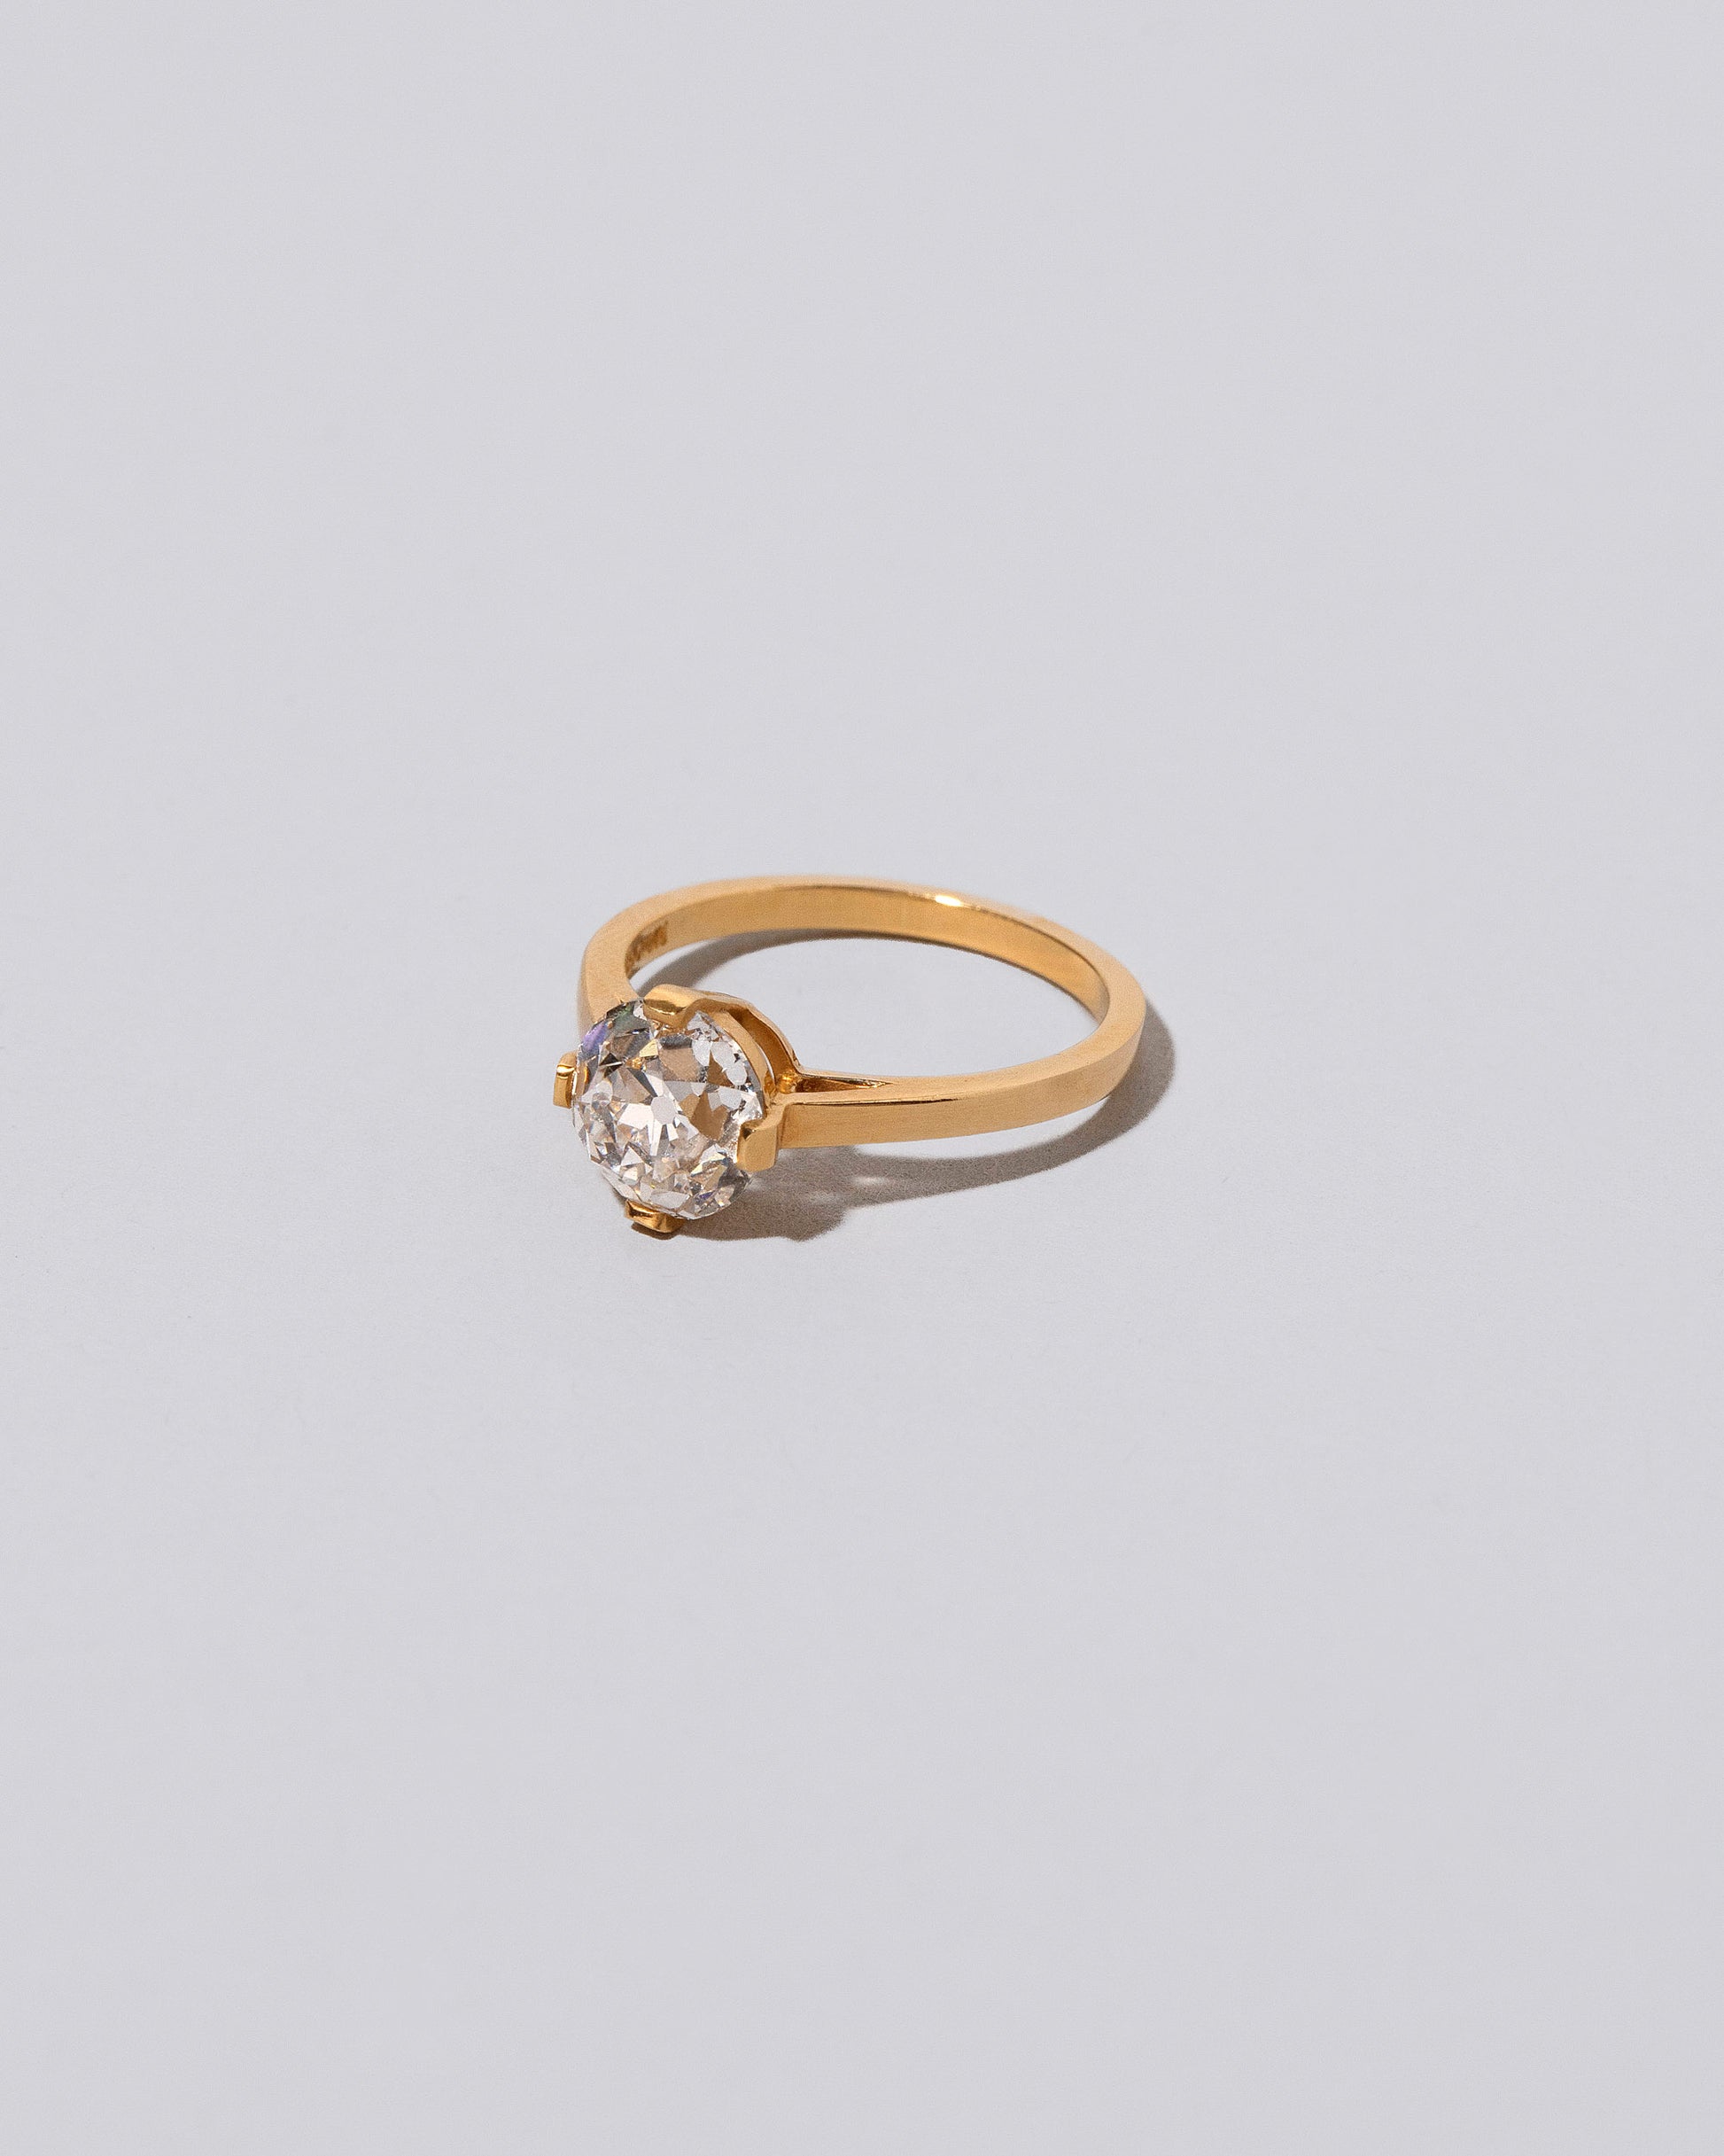 View from the side of the White Diamond Barragán Ring on light color background.